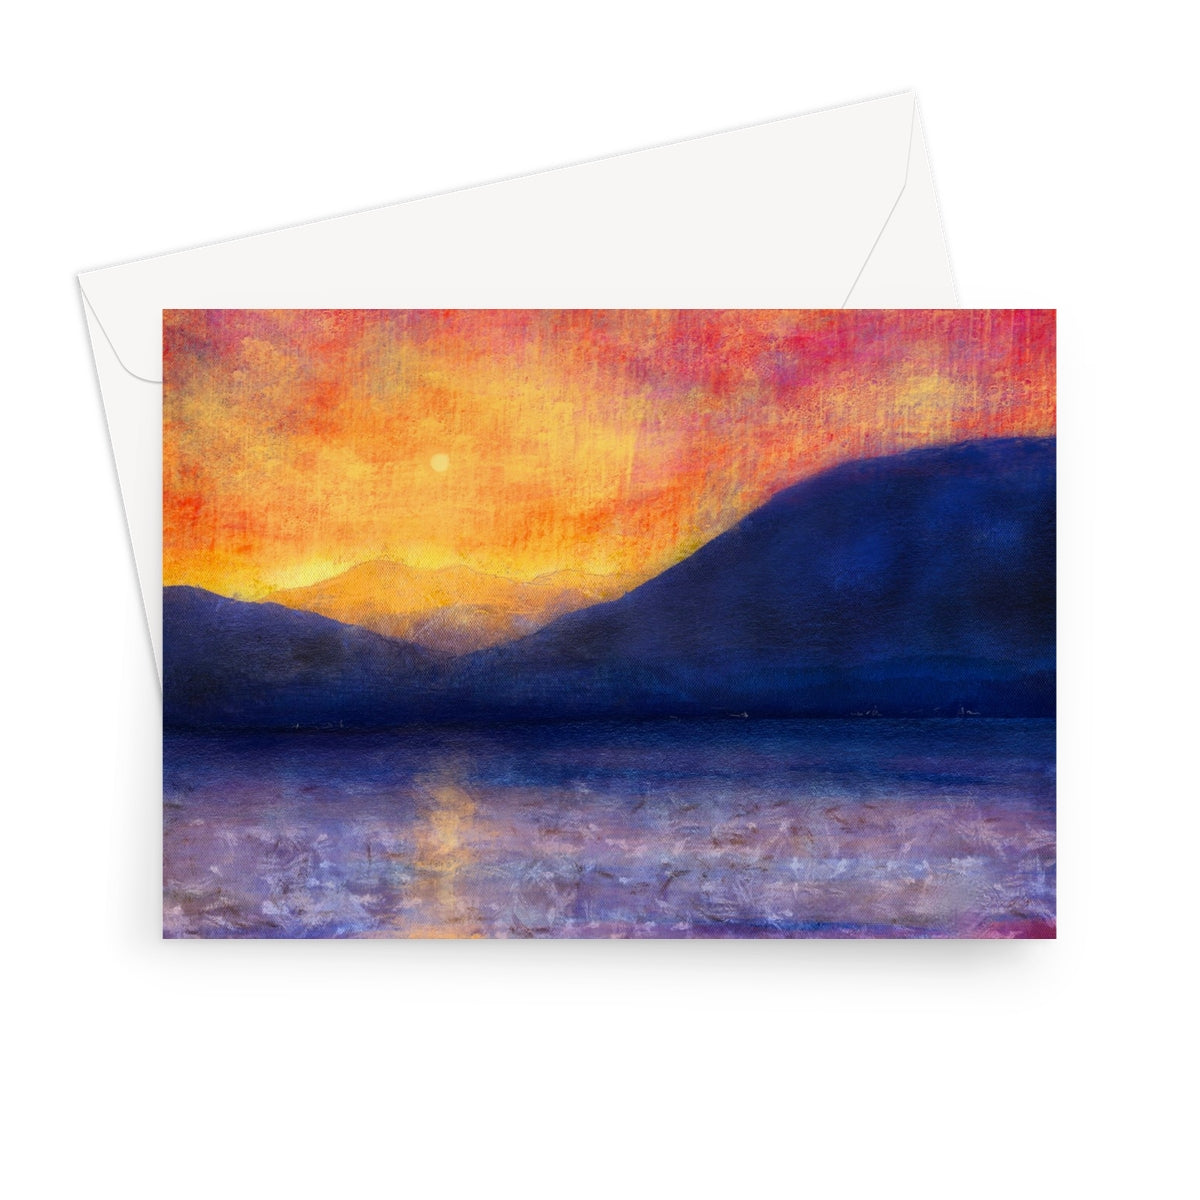 Sunset Approaching Mull Art Gifts Greeting Card-Greetings Cards-Hebridean Islands Art Gallery-7"x5"-1 Card-Paintings, Prints, Homeware, Art Gifts From Scotland By Scottish Artist Kevin Hunter